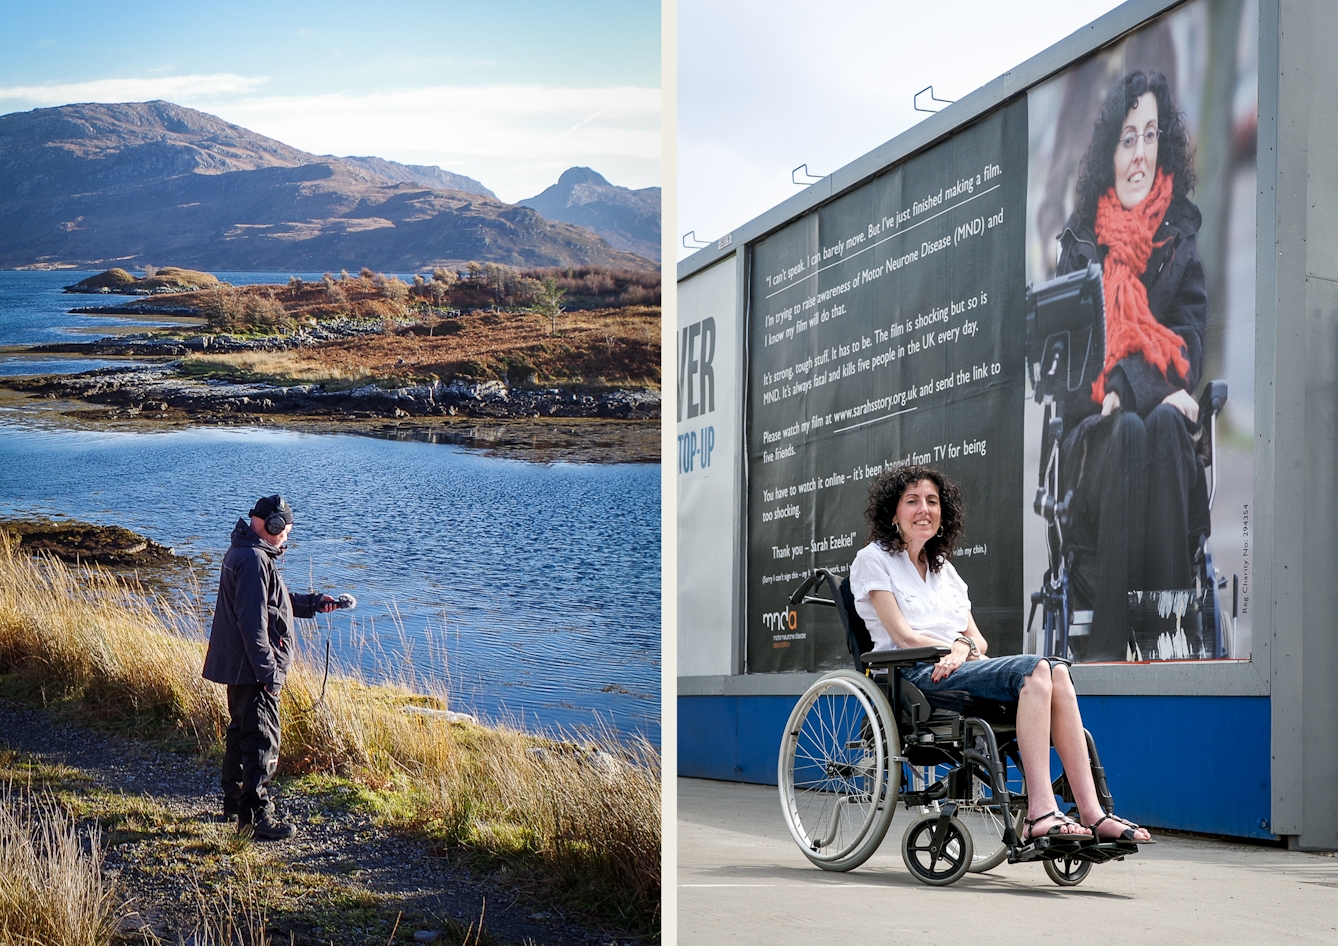 Photographic diptych. The image on the left shows a man standing in a remote mountain landscape next to a river or lake. He is wearing an outdoor coat, woollen hat and a pair of headphones. His left hand is help out in front of him holding a microphone. The image on the right shows a woman seated in a wheelchair outside, looking to camera. Behind her is a large billboard showing some text and a large photograph of the same woman. The text begins, 'I can't speak. I can barely move. But I've just finished making a film.'.